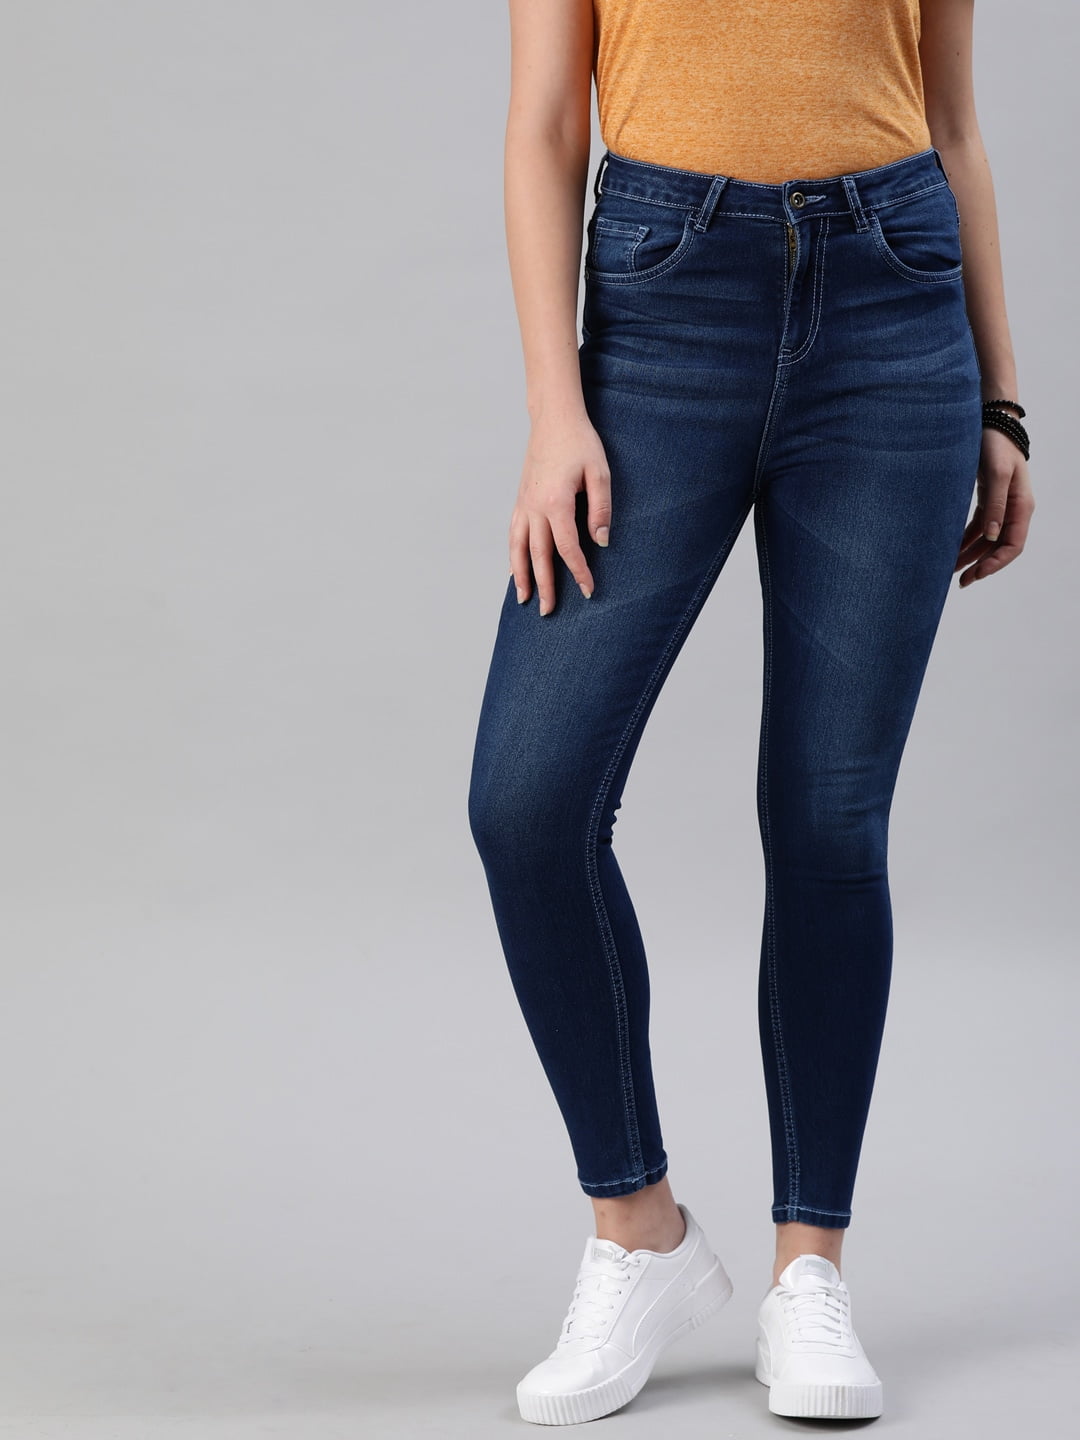 Buy Blue Jeans & Jeggings for Women by HIGH STAR Online | Ajio.com